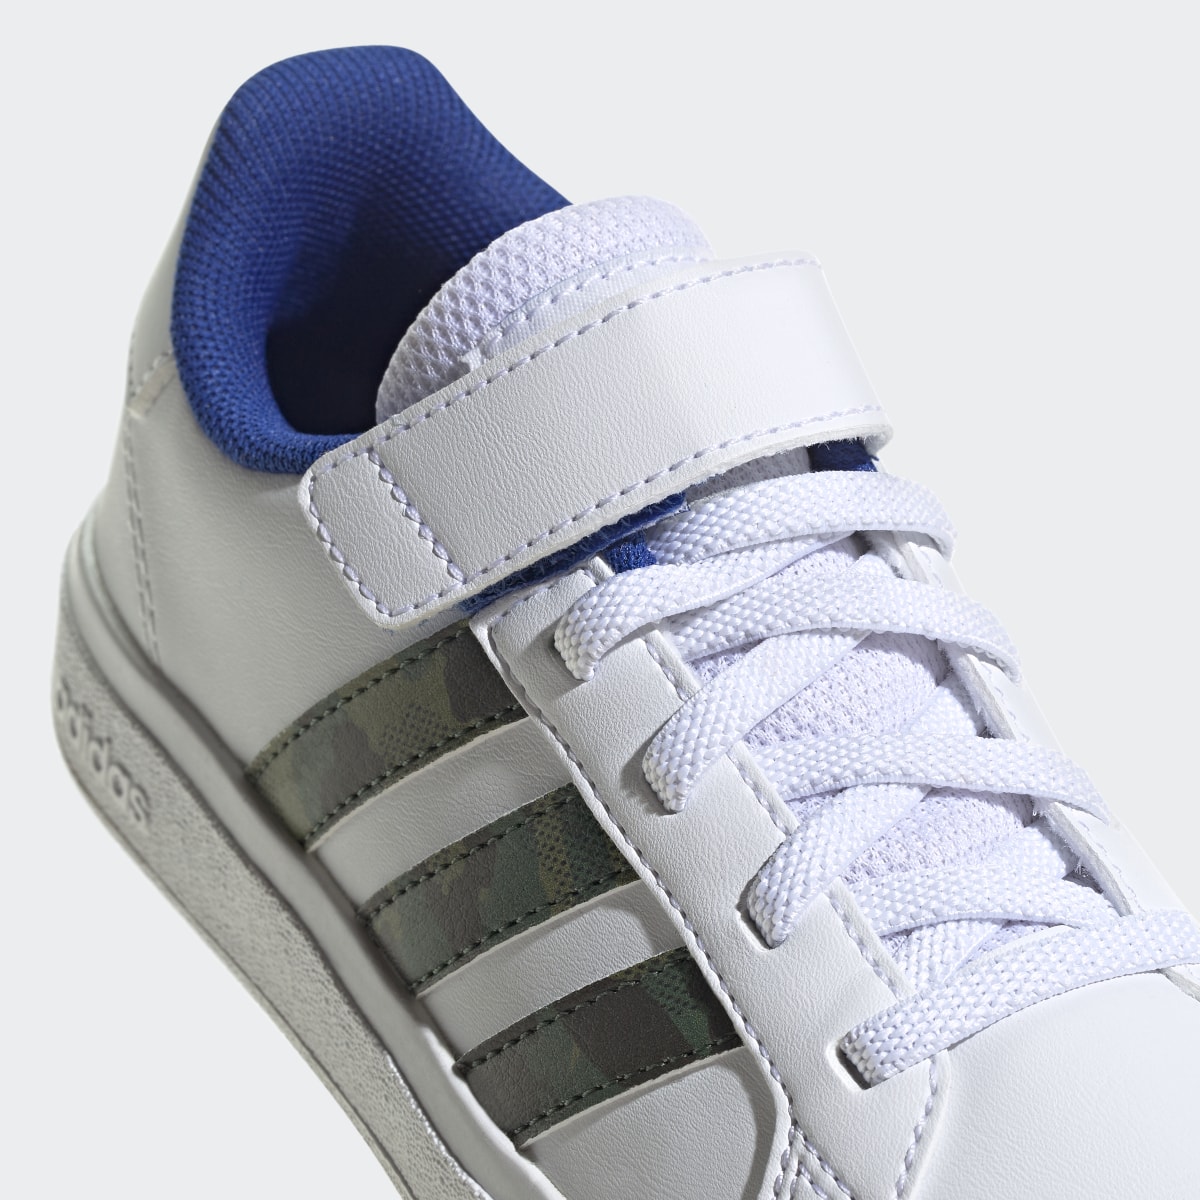 Adidas Grand Court Lifestyle Court Elastic Lace and Top Strap Schuh. 8